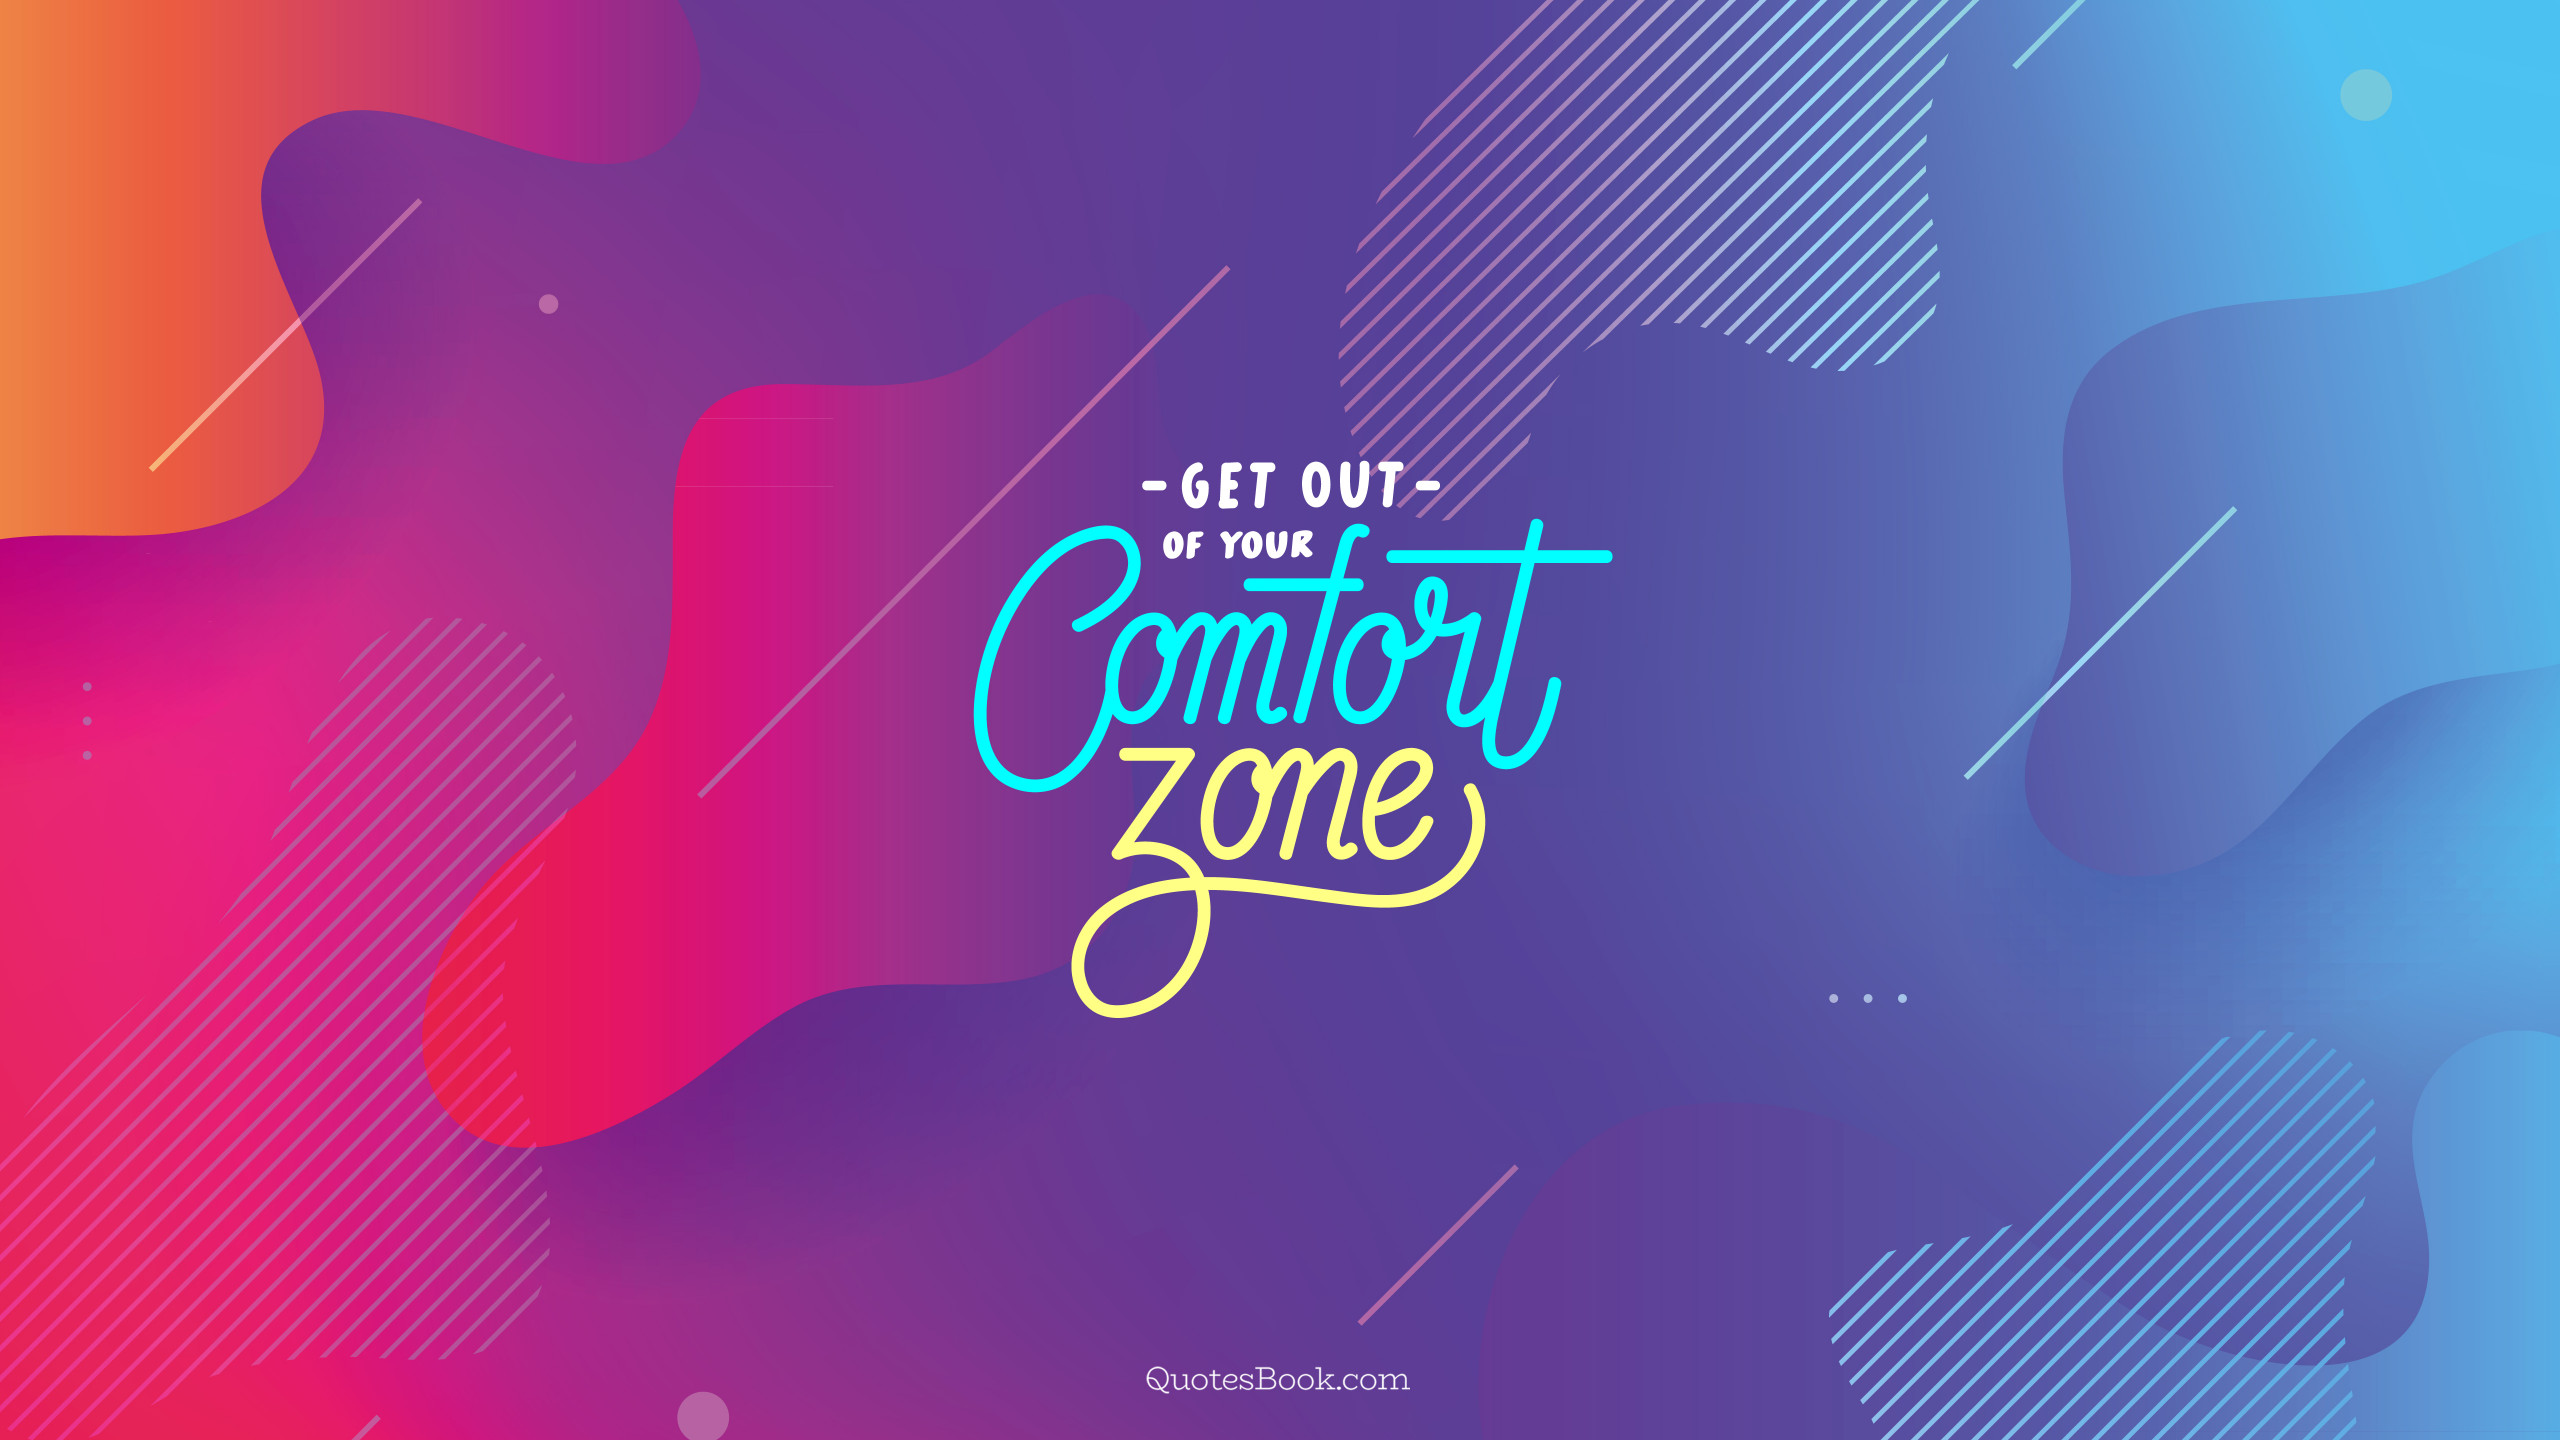 Get Out Of Your Comfort Zone Quotesbook